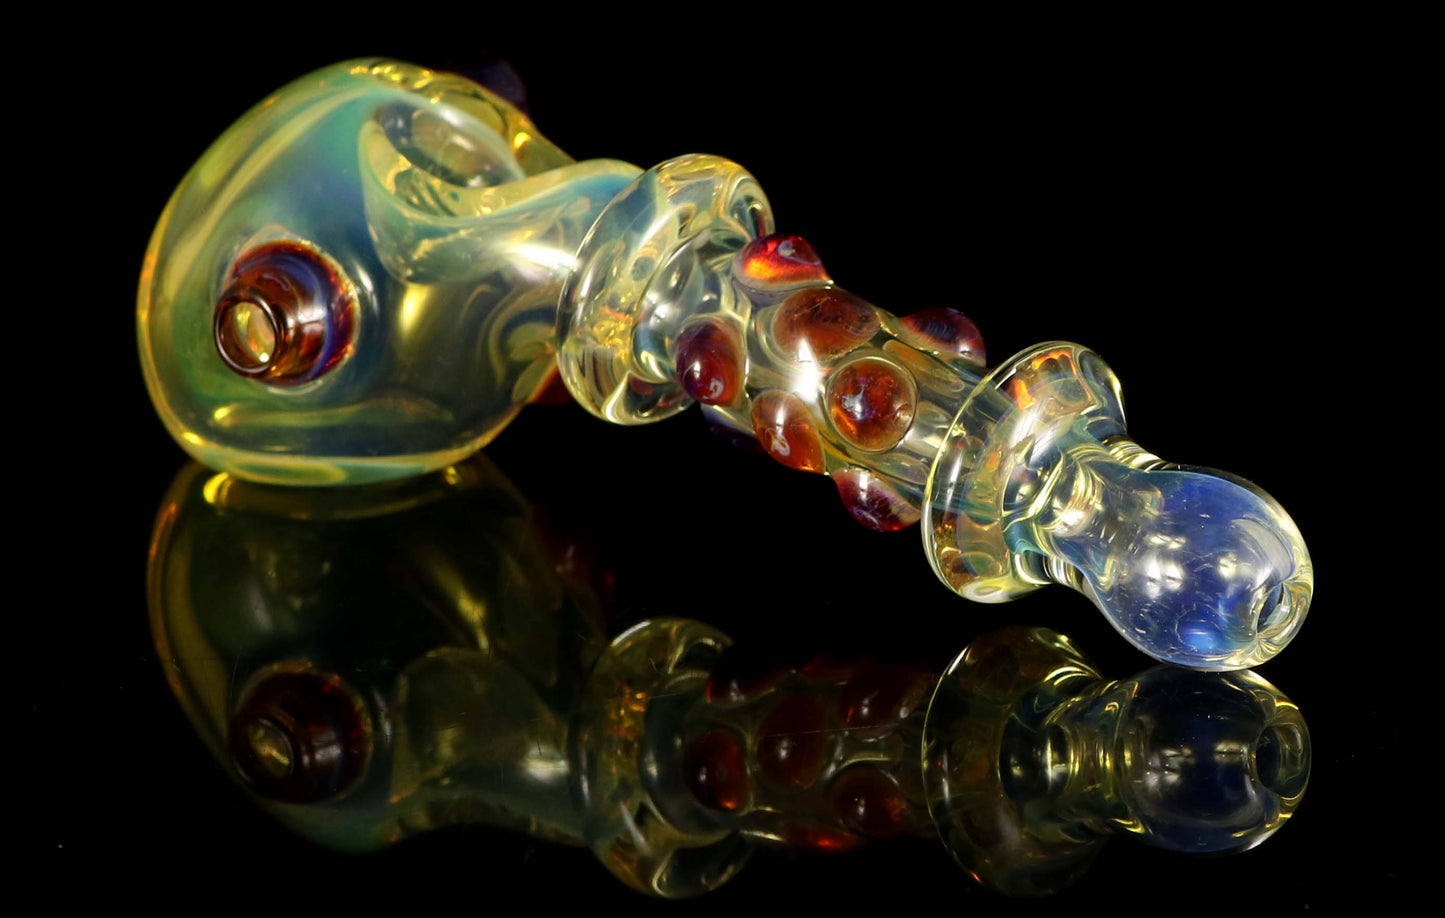 Drooper Spoon pipe by, Phil_pgw